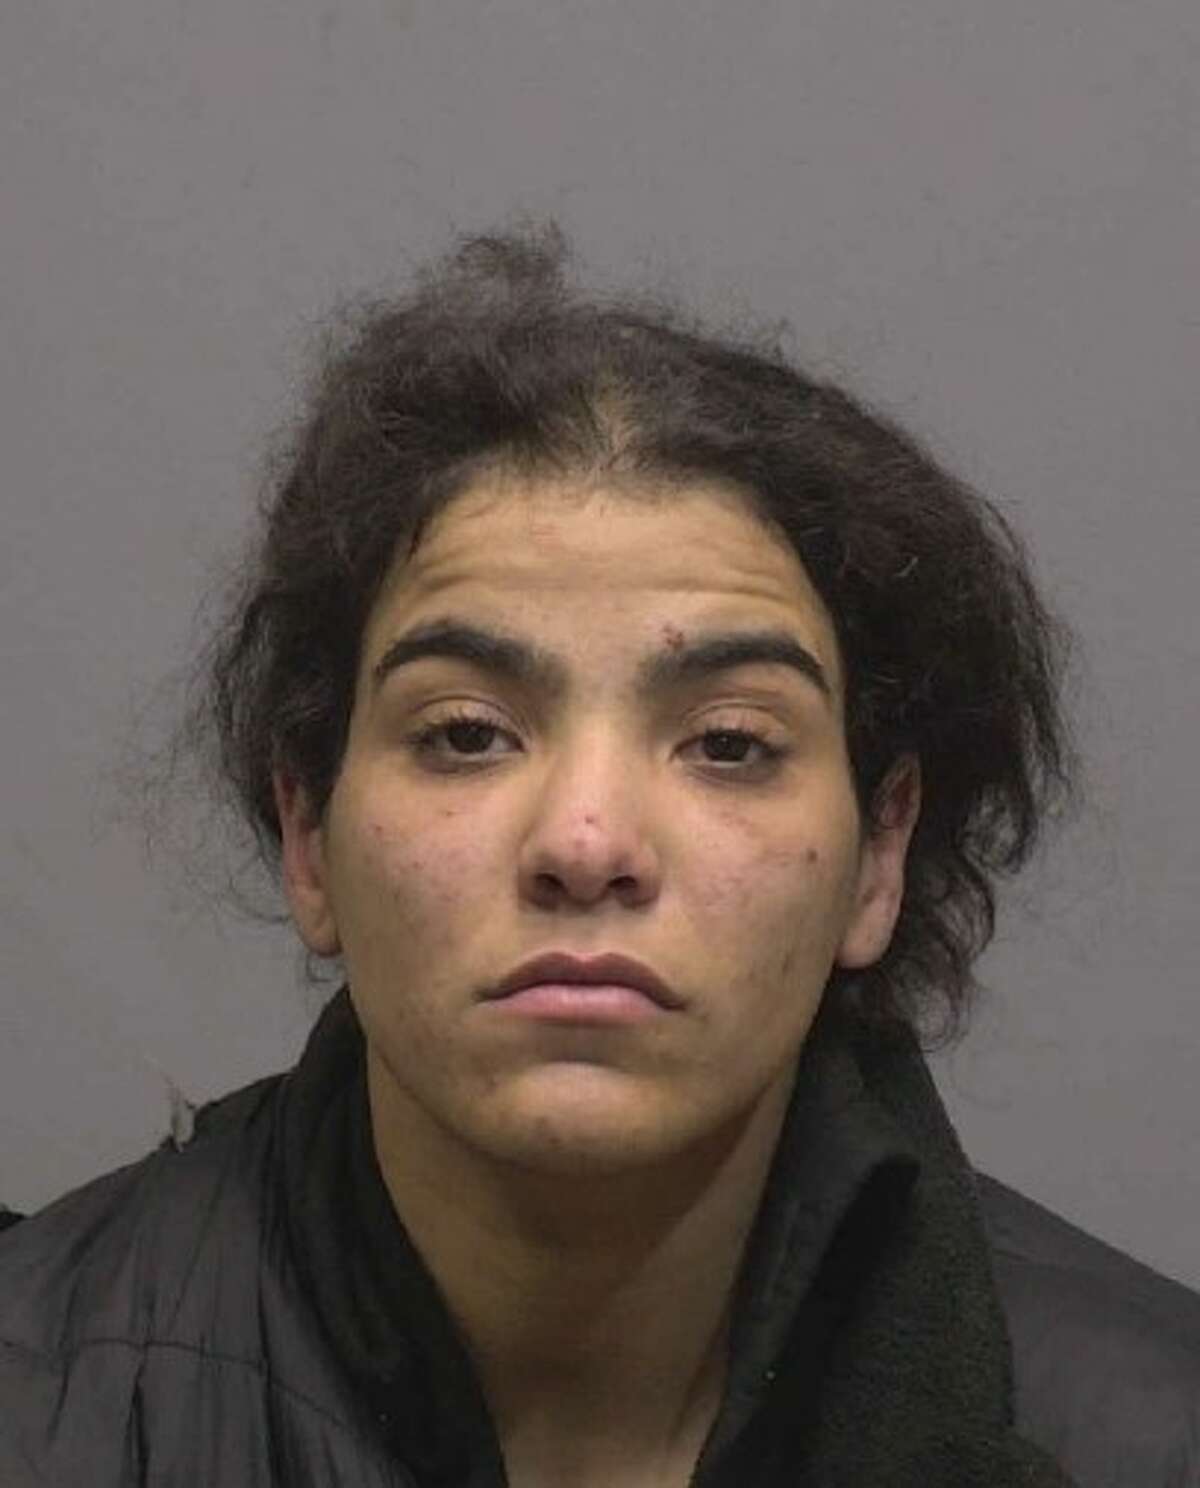 New Haven's Robetsy Quinones, 25, was found hiding in a dumpster with cocaine and drug paraphernalia after committing a robbery on Genesee Street on Tuesday afternoon, according to New Haven police. .